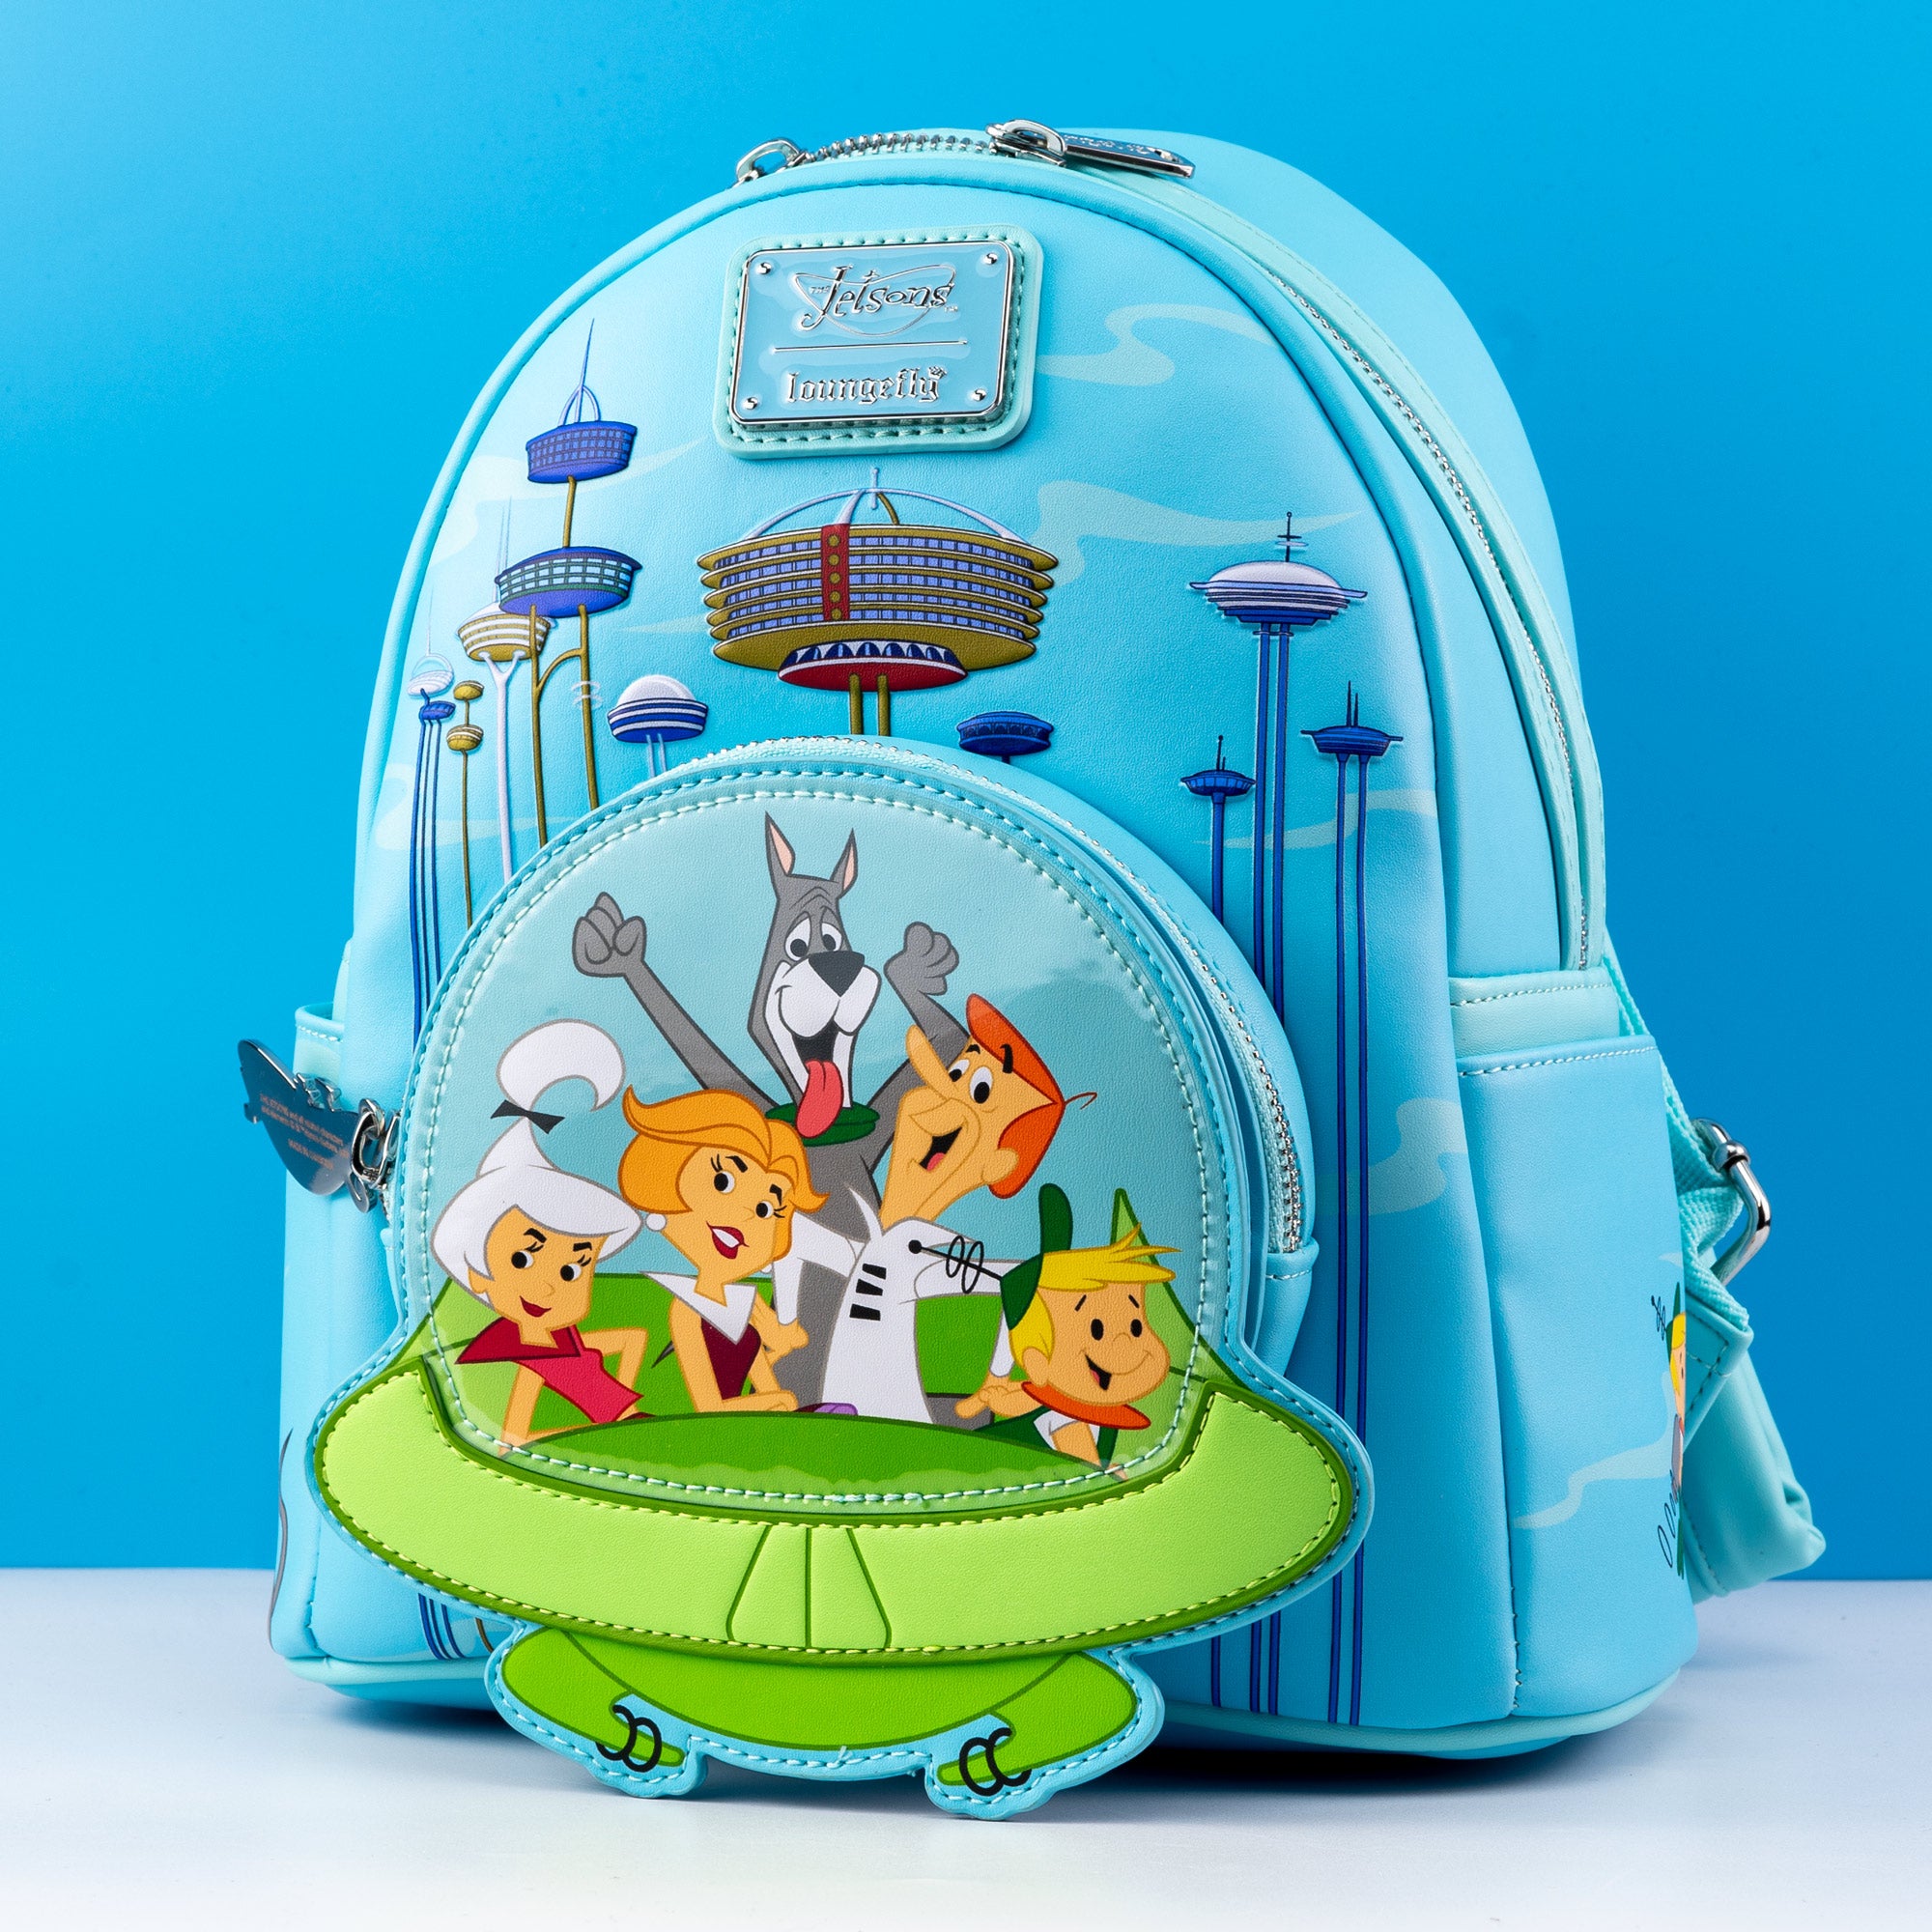 Loungefly x The Jetsons Spaceship Mini Backpack